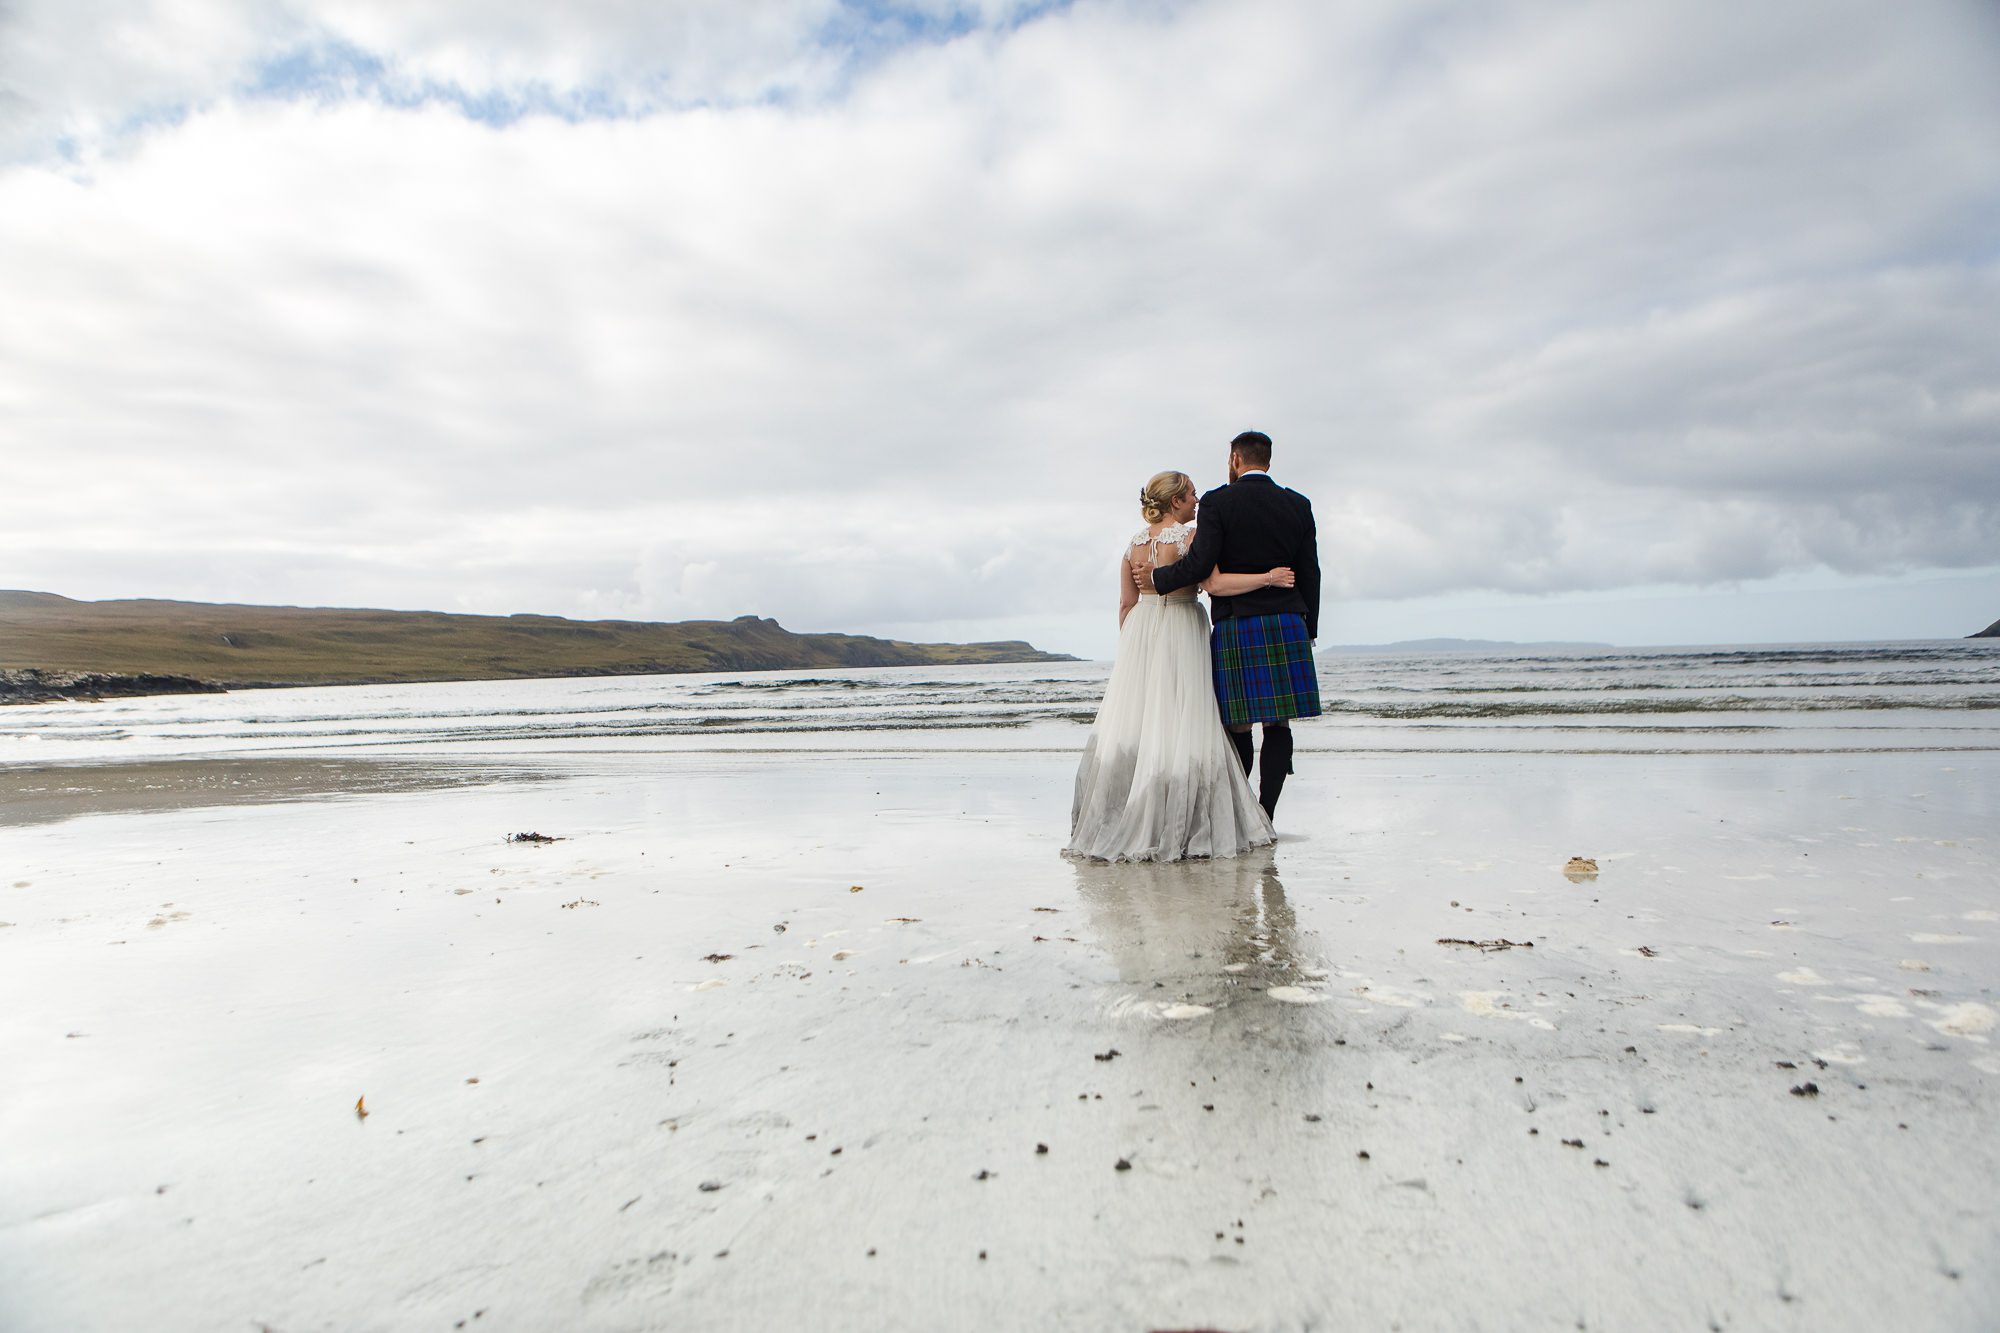 Bride and groom reflected in volcanic sands Glenbrittle Isle of Skye